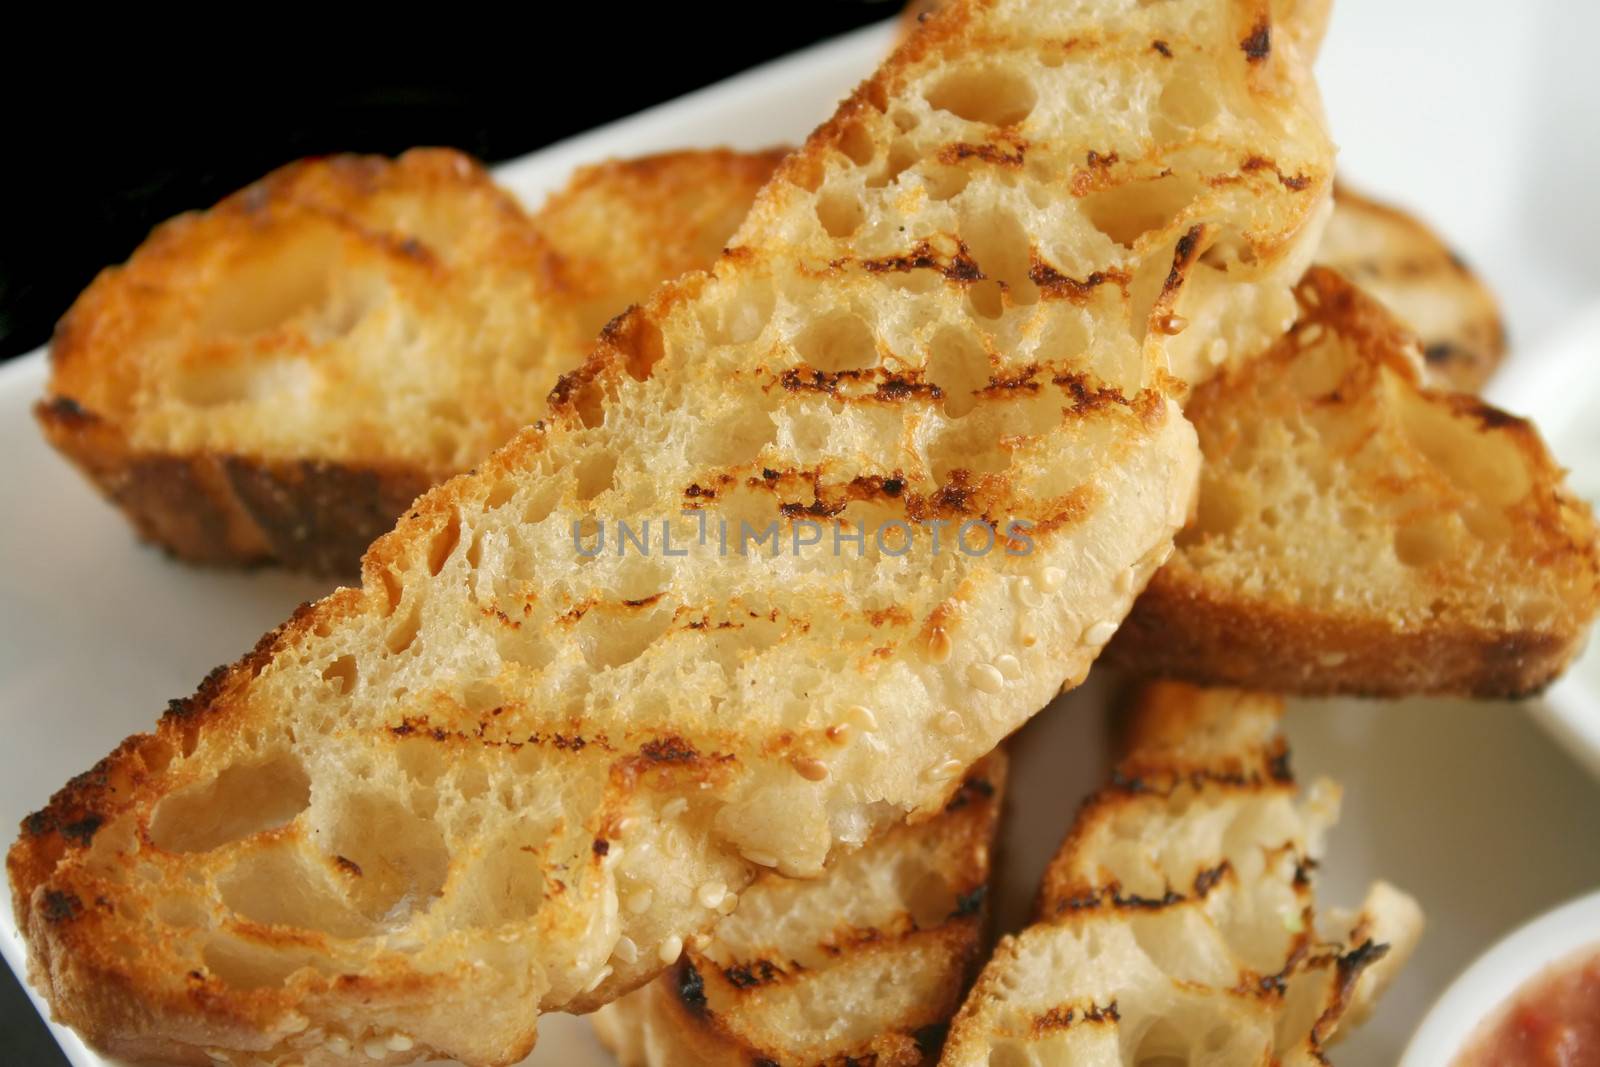 Slices of crisp golden grill toasted Turkish bread.